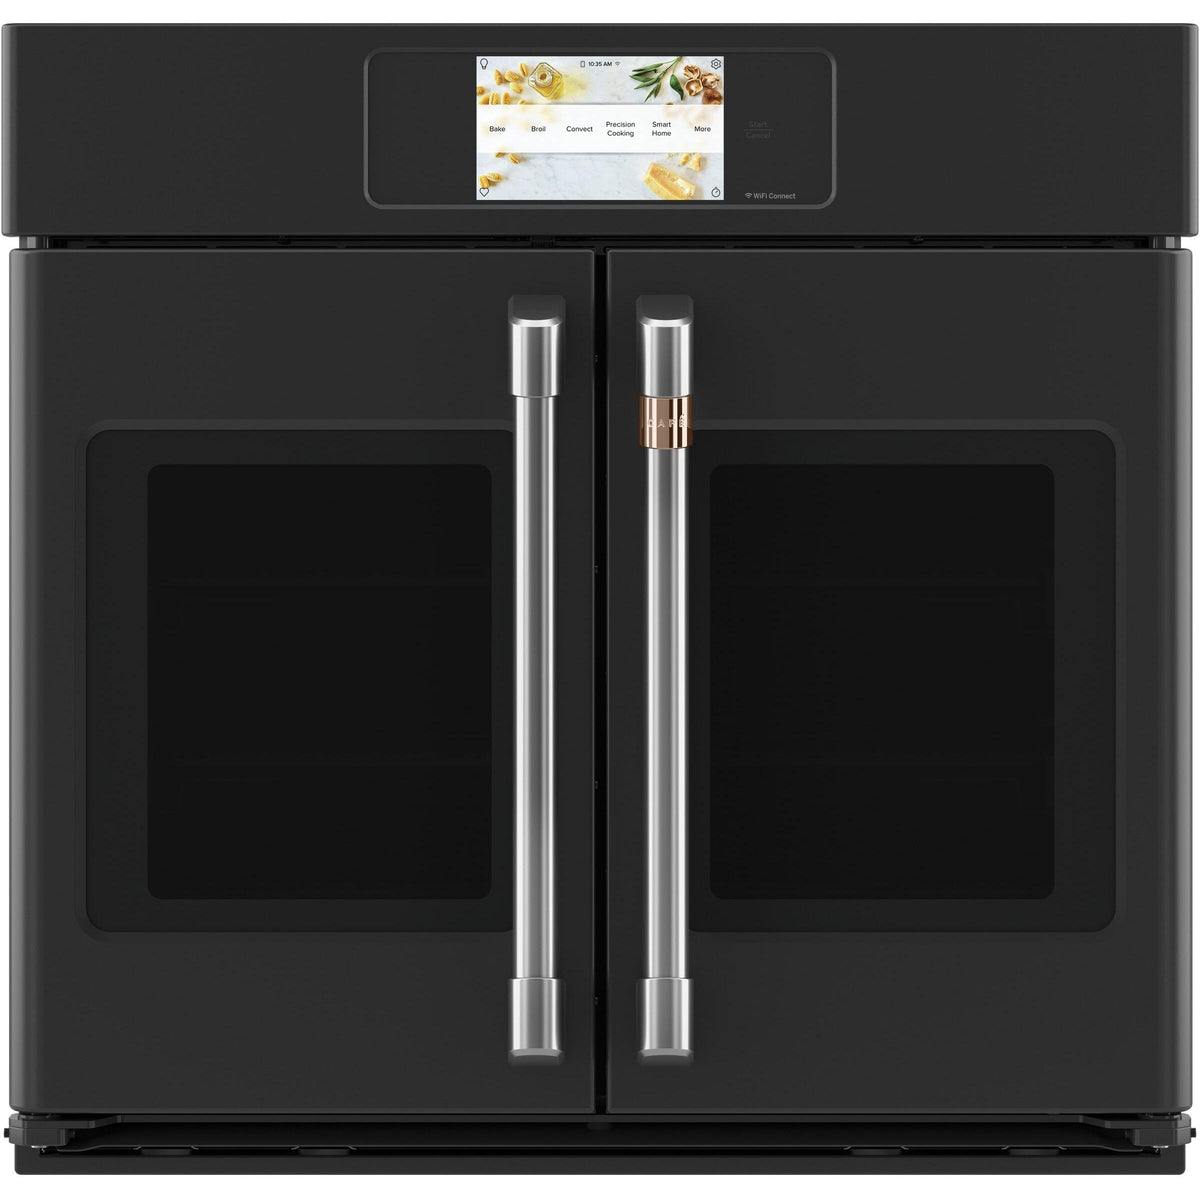 30-inch, 5.0 cu.ft. Built-in Single Wall Oven with True European Convection with Direct Air CTS90FP3ND1 IMAGE 1